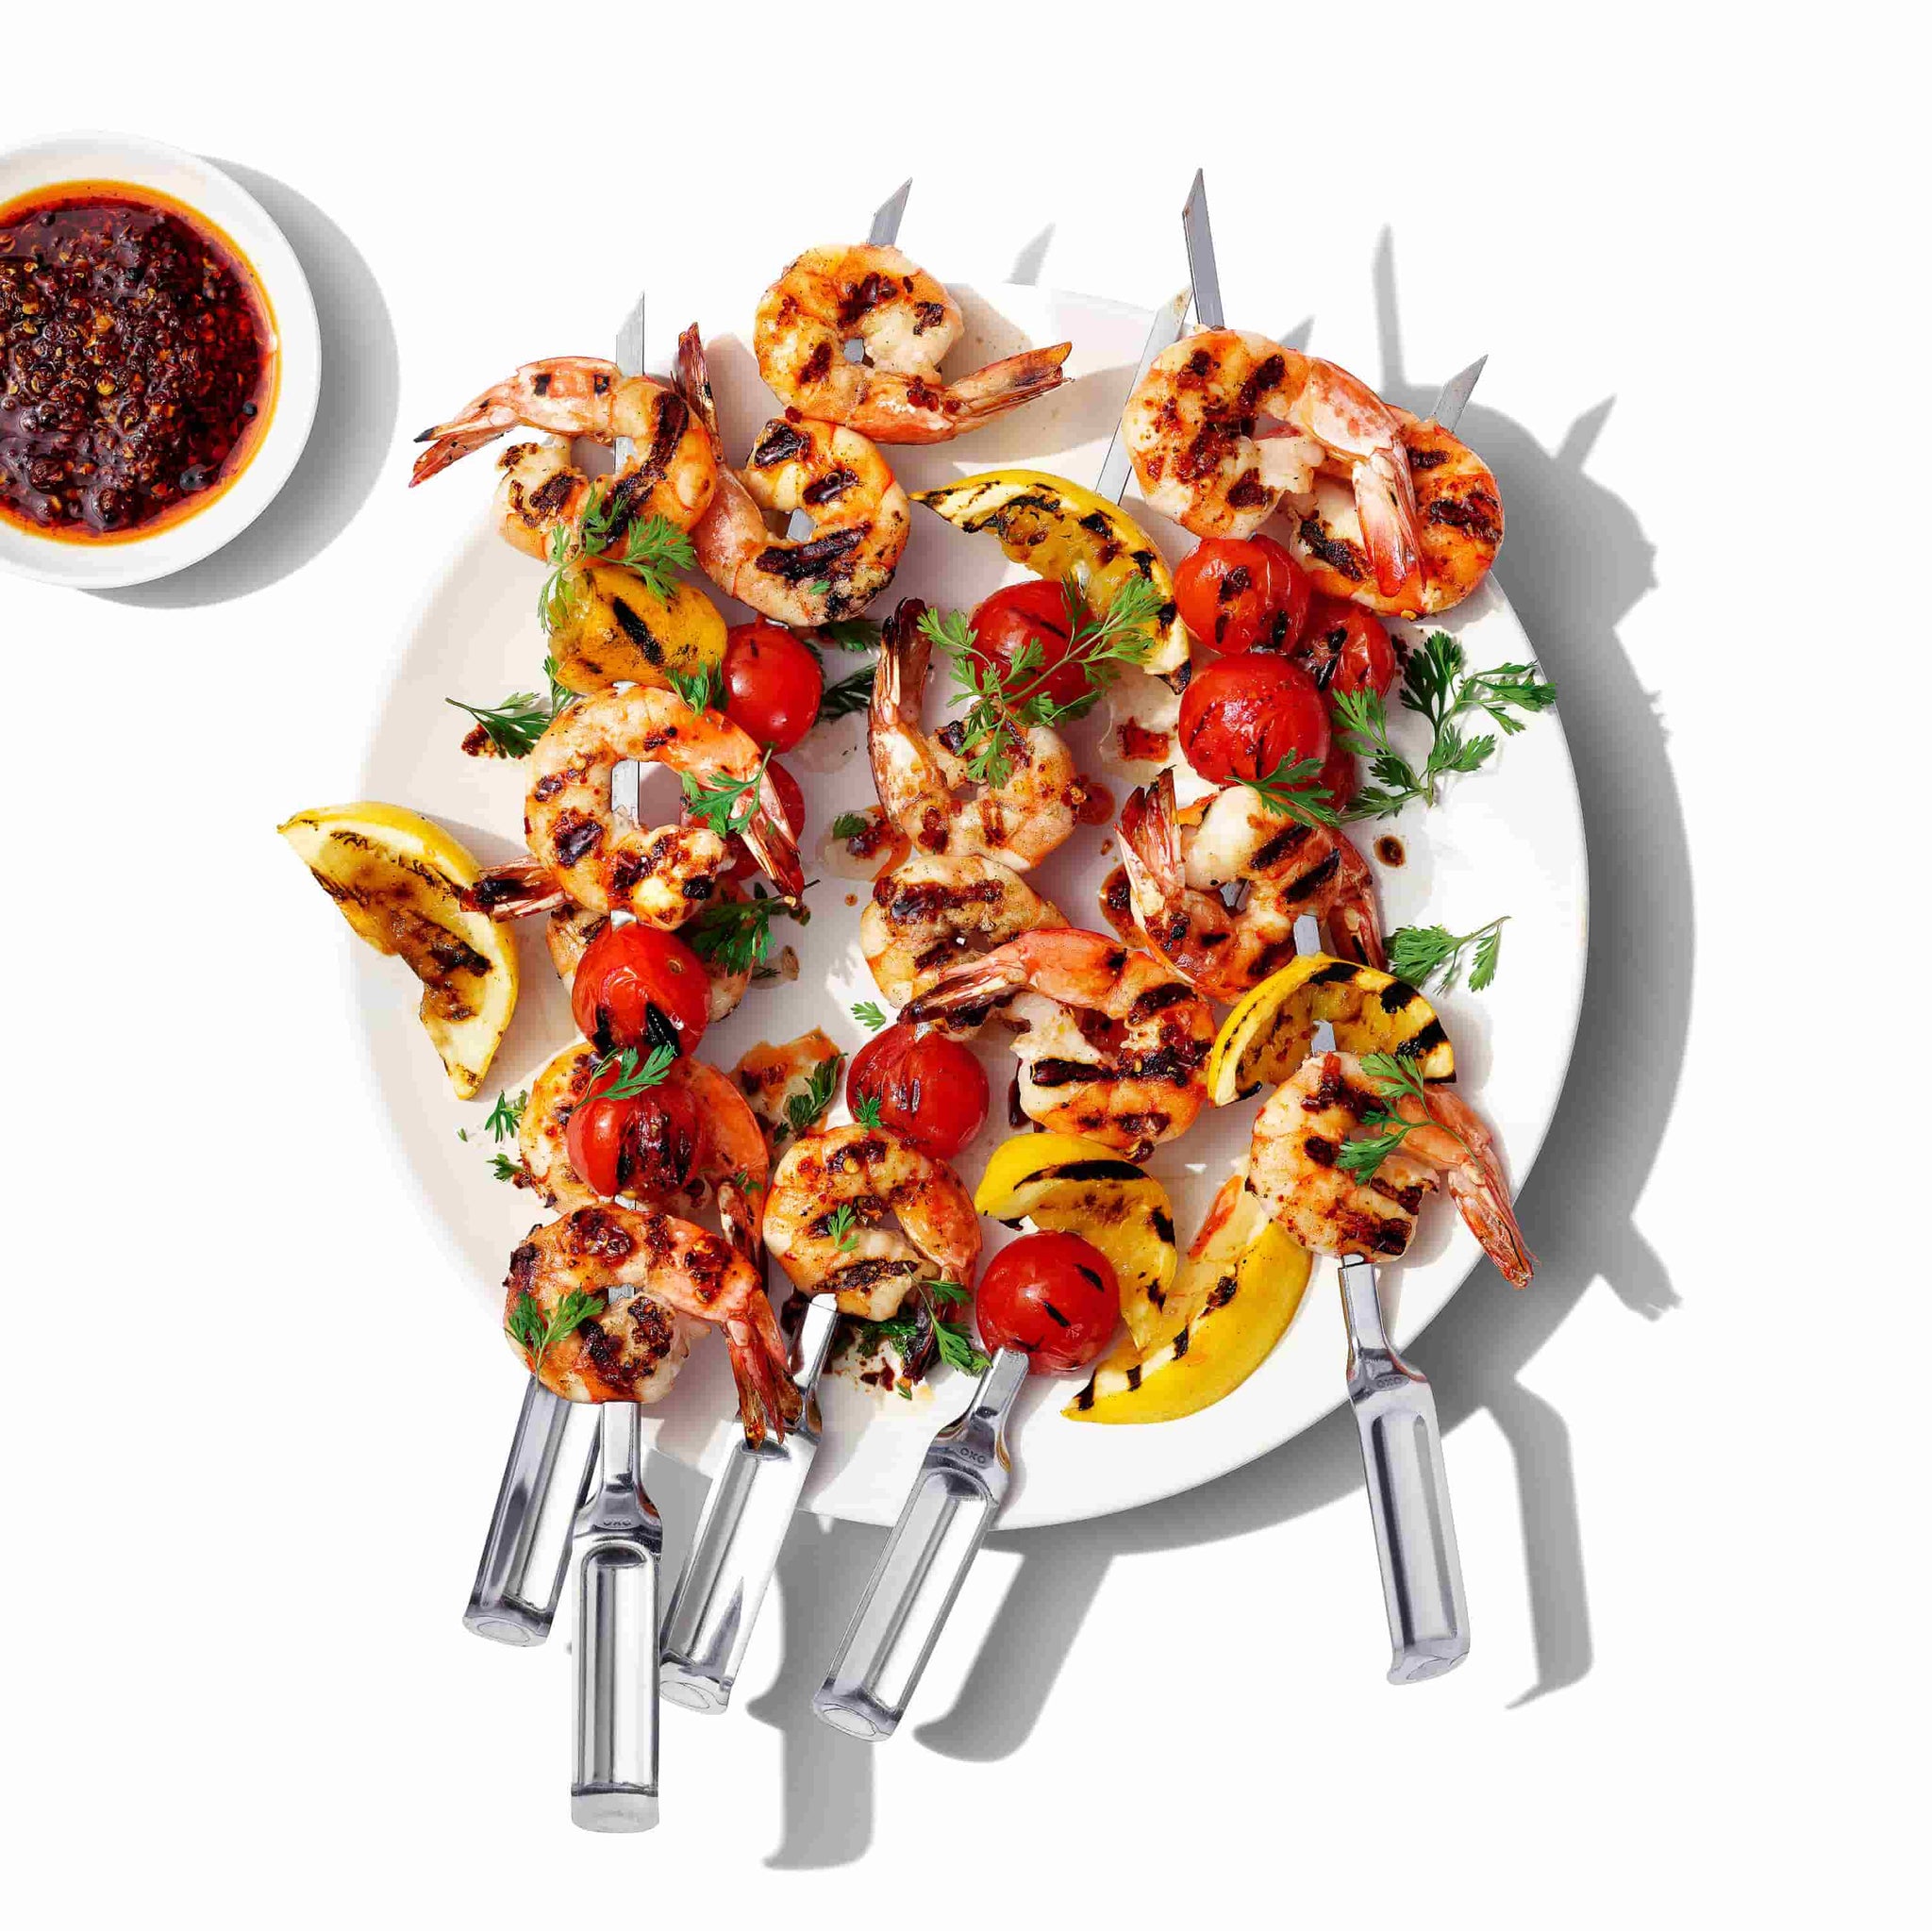 Oxo Good Grips Set of 6 Skewers grilled prawn